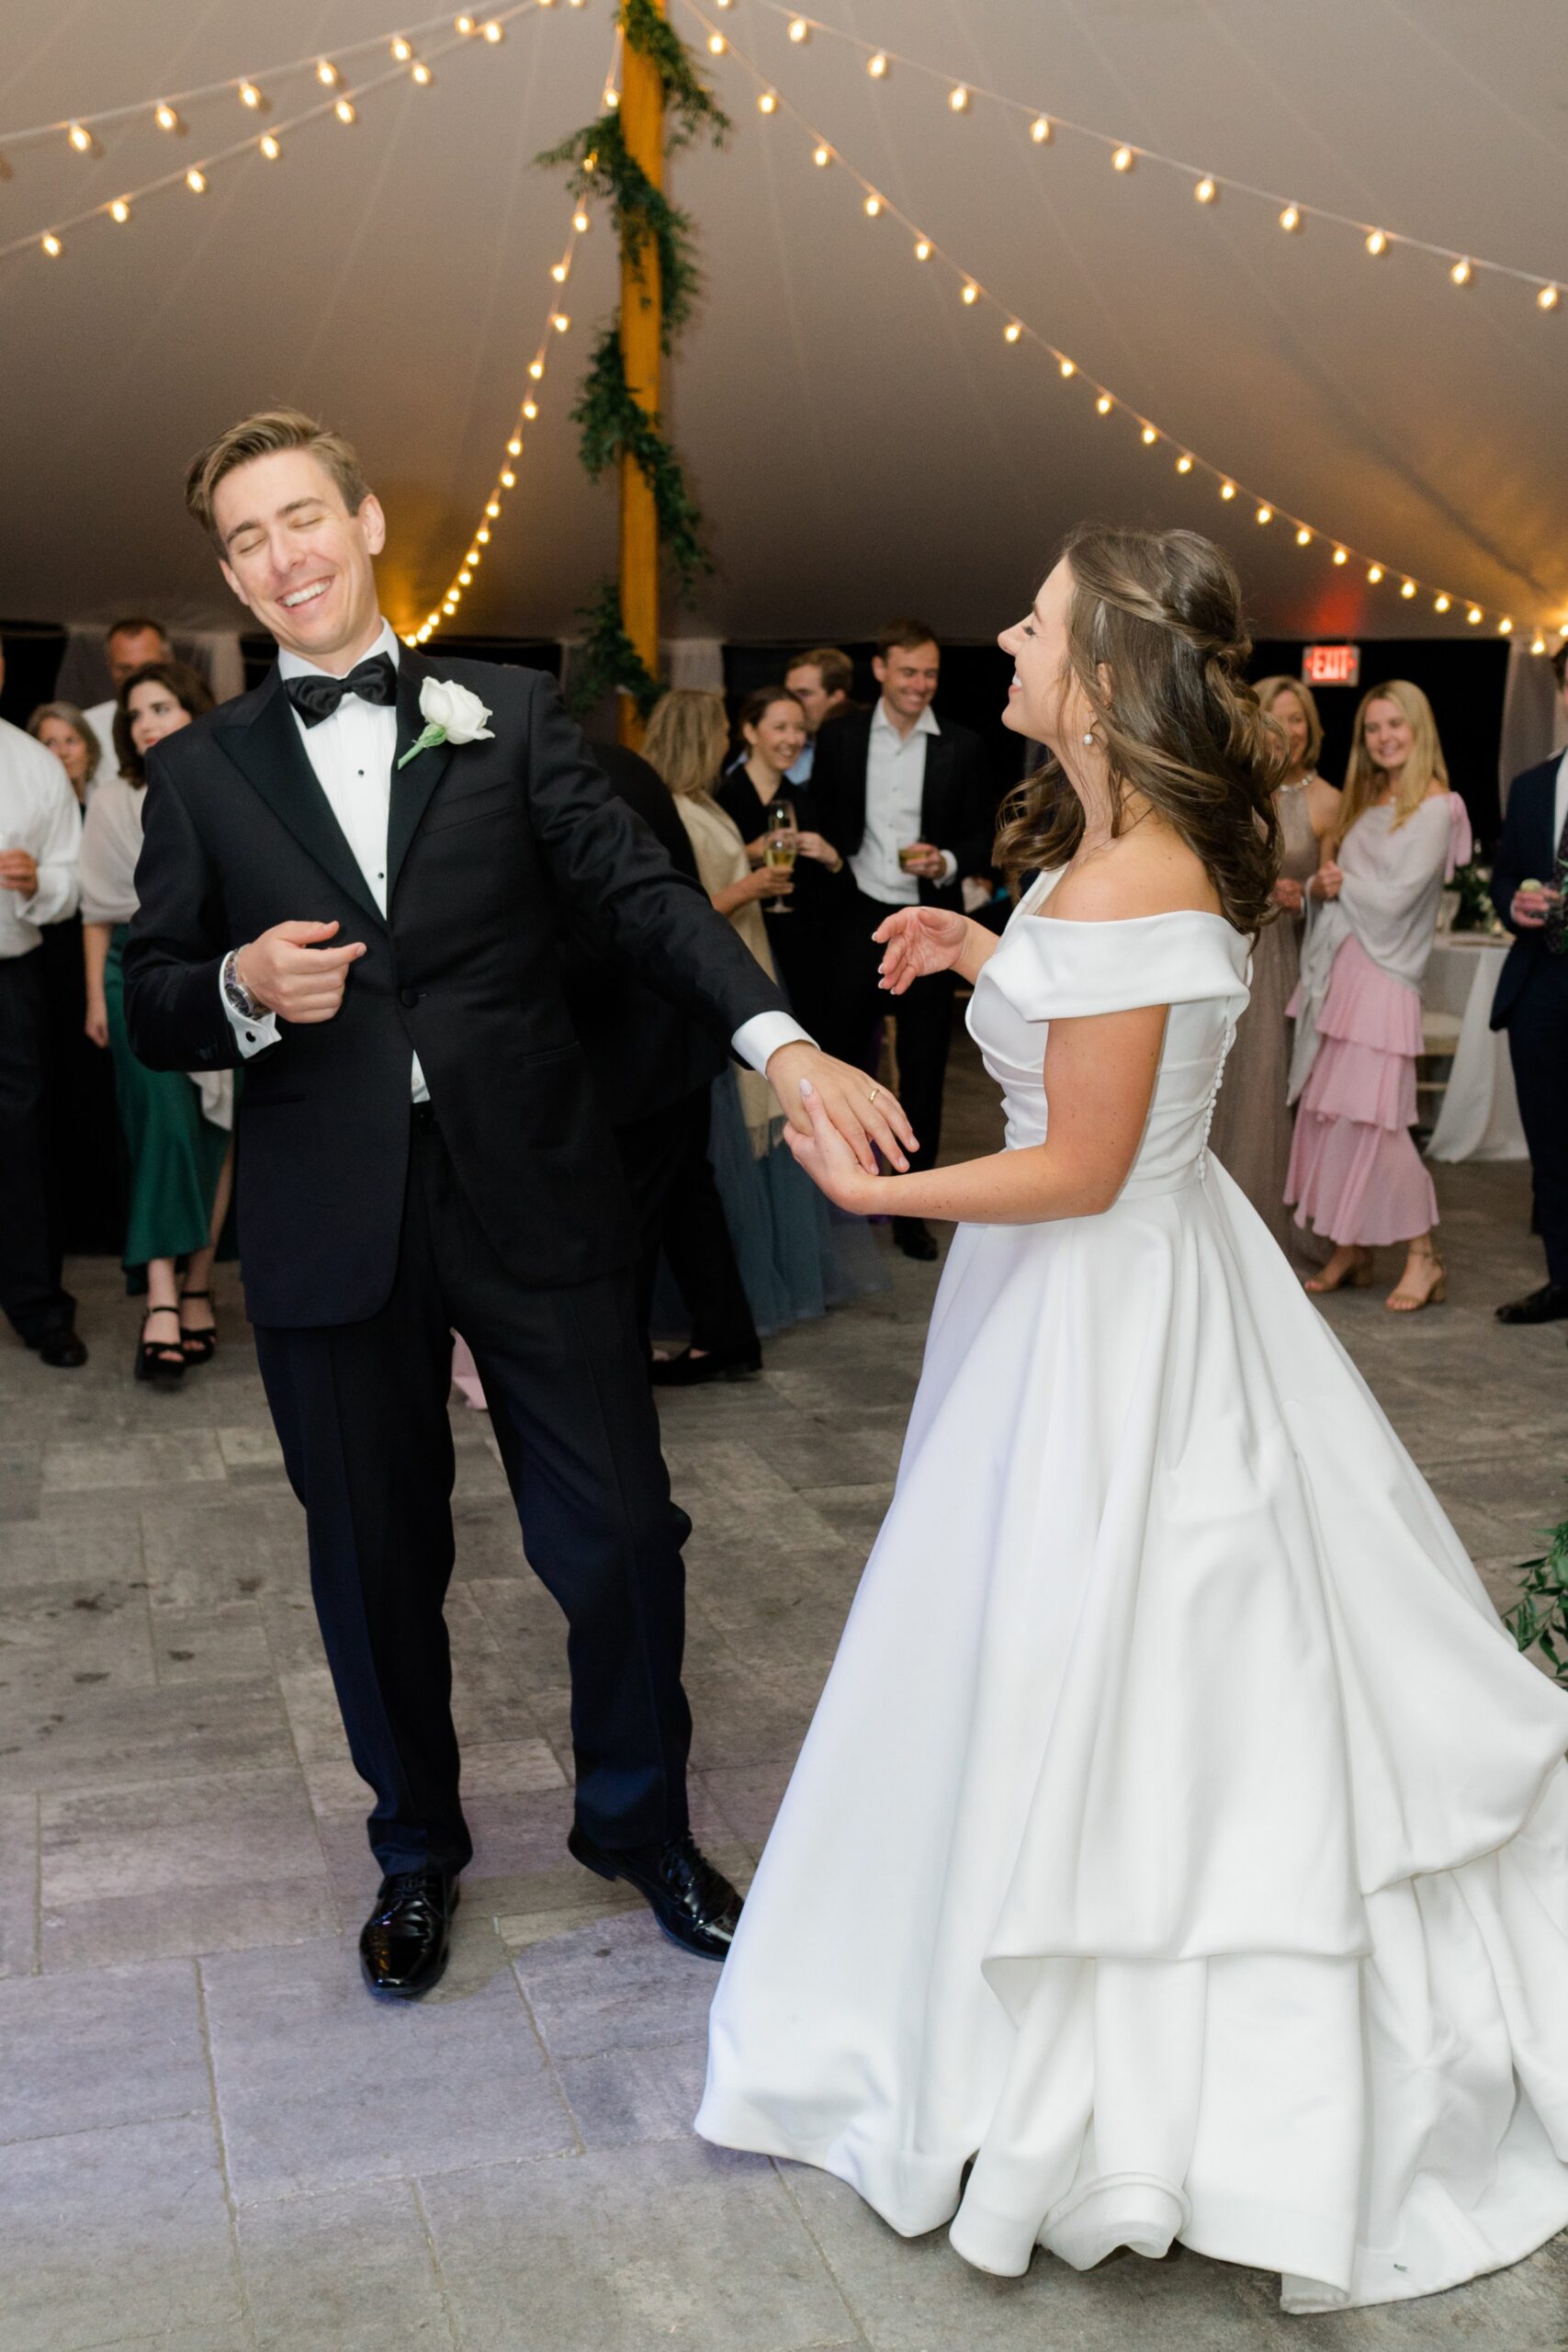 Bride and groom share fun moment on the dance floor.